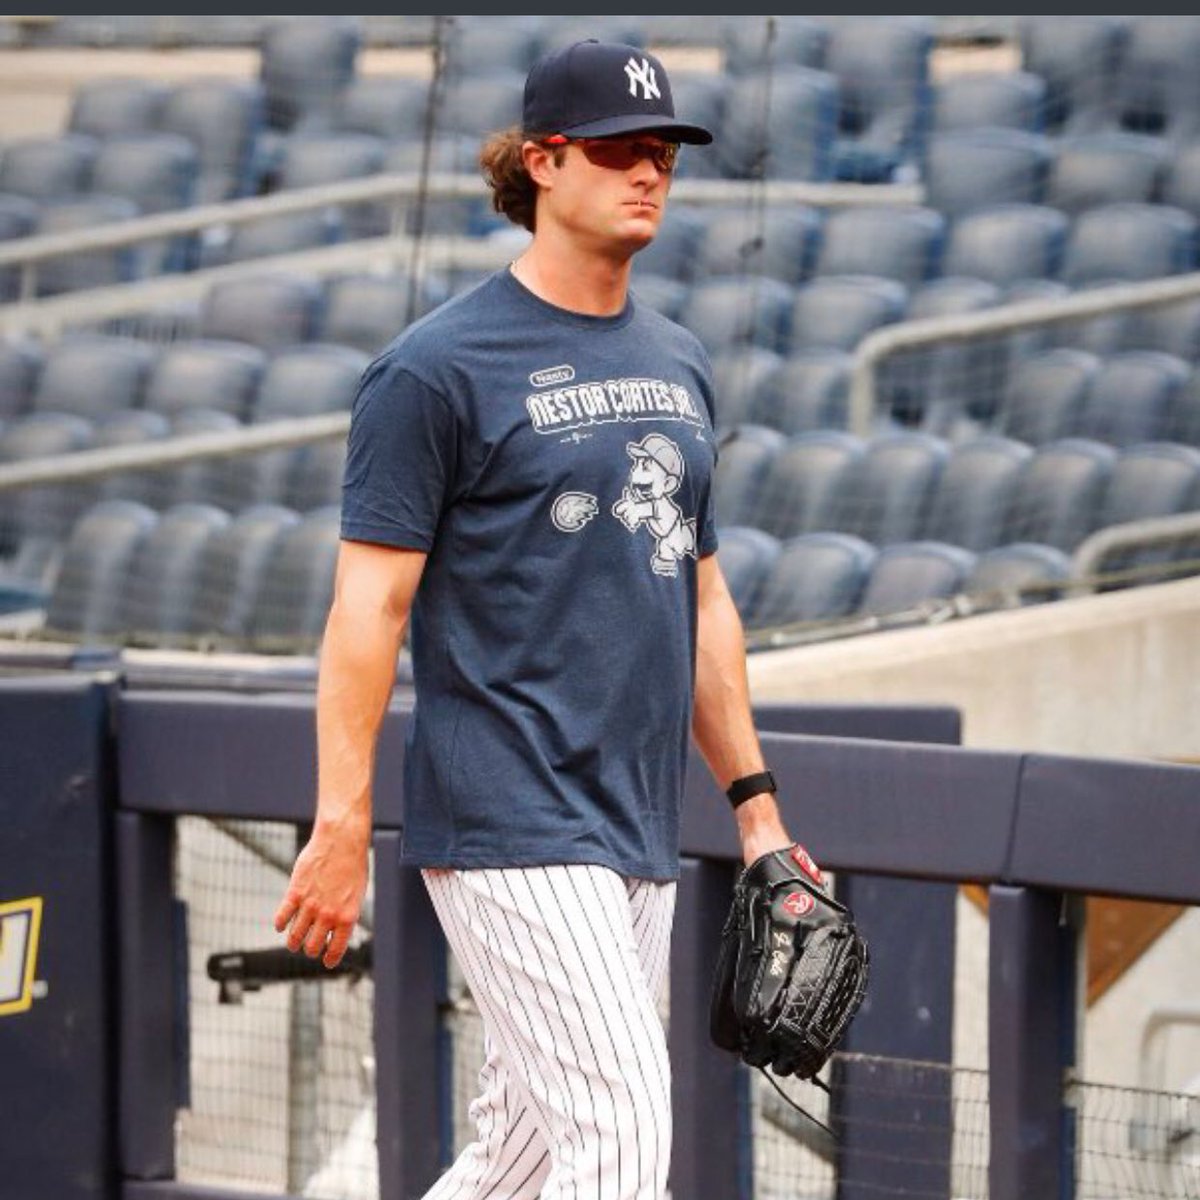 New York Porch Sports on X: Despite Yankees win, Gerrit Cole is said to  have been in a sour mood after being forced to wear Nestor Cortes' RotoWear  shirt. “You ever wanna